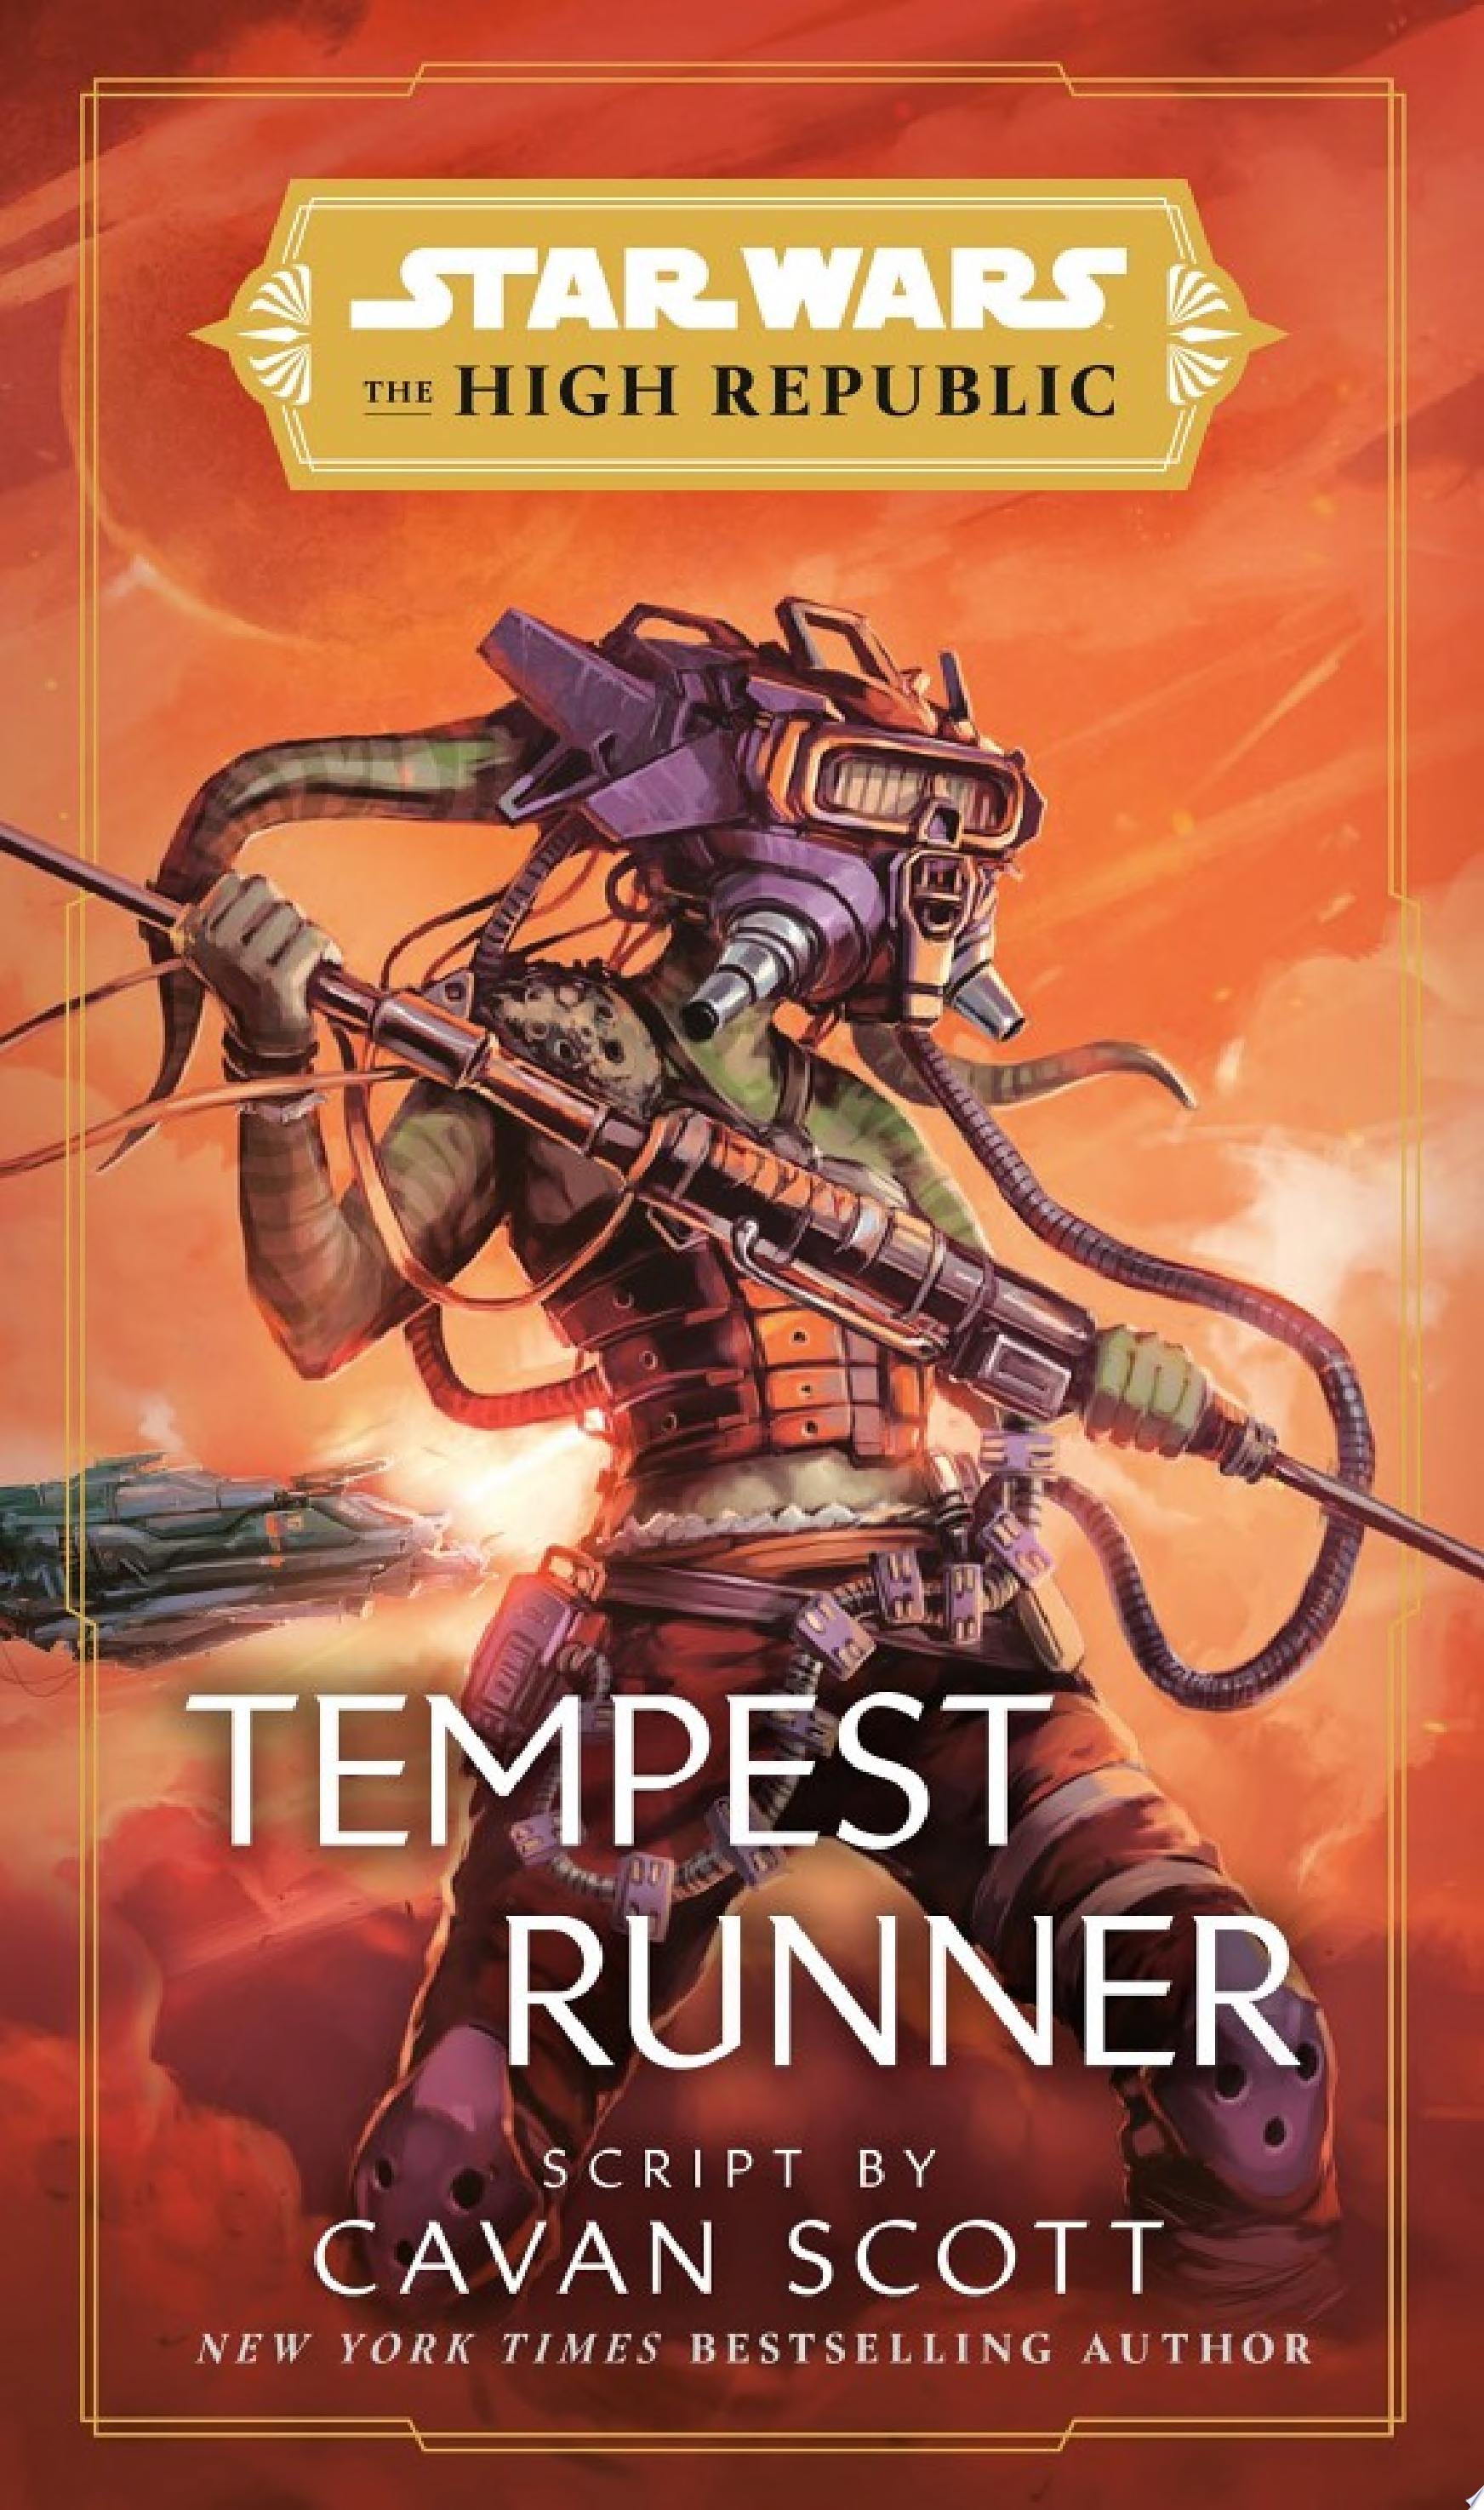 Image for "Star Wars: Tempest Runner (The High Republic)"